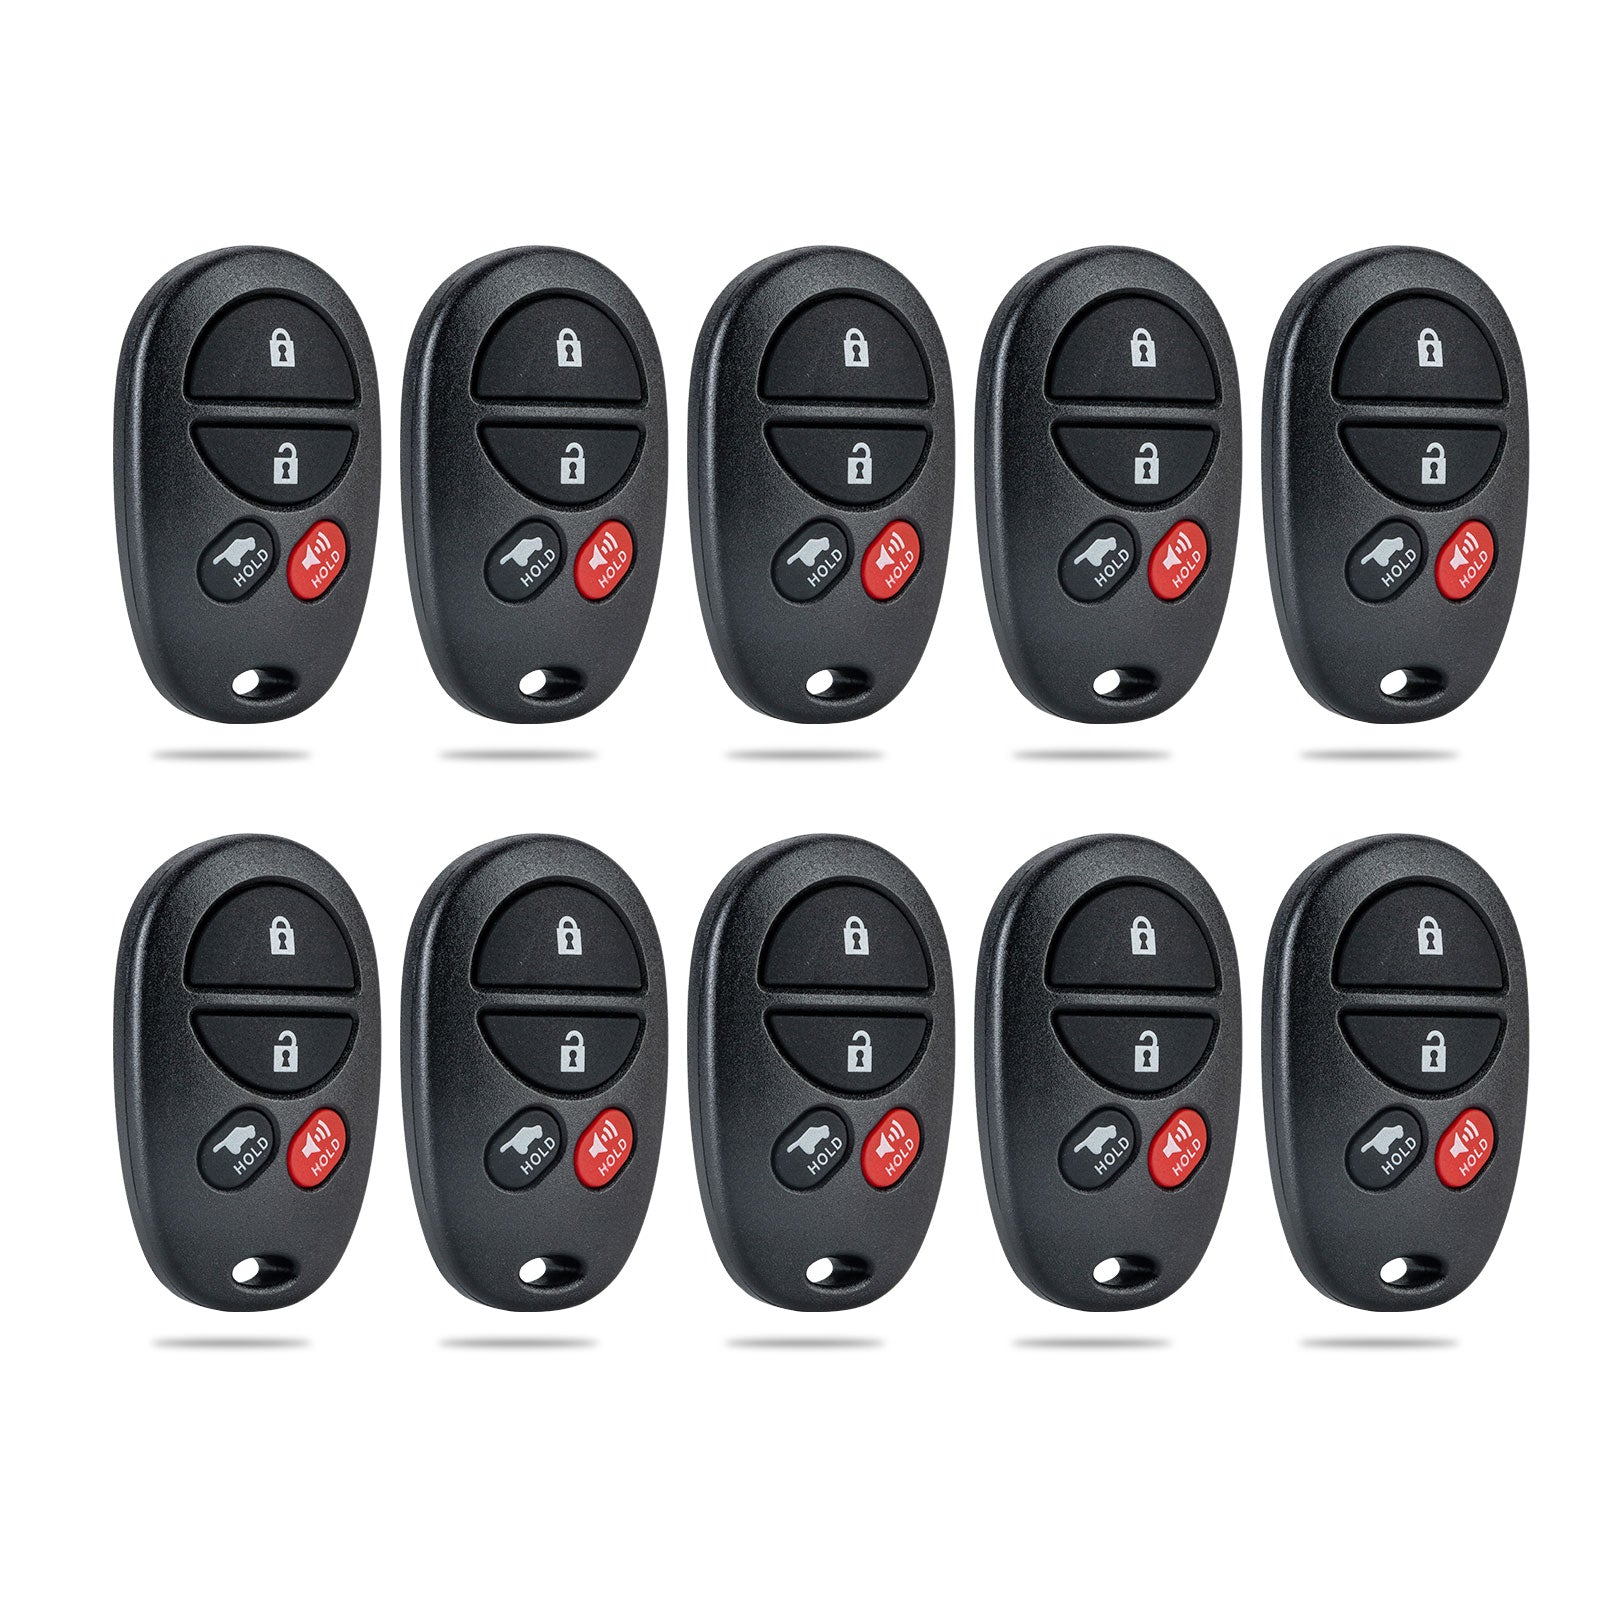 315MHZ Keyless Entry Remote Control Replacement for 2008-2016 Toyota Sequoia 2007-2015 Toyota Highland GQ43VT20T  KR-T4RD-10